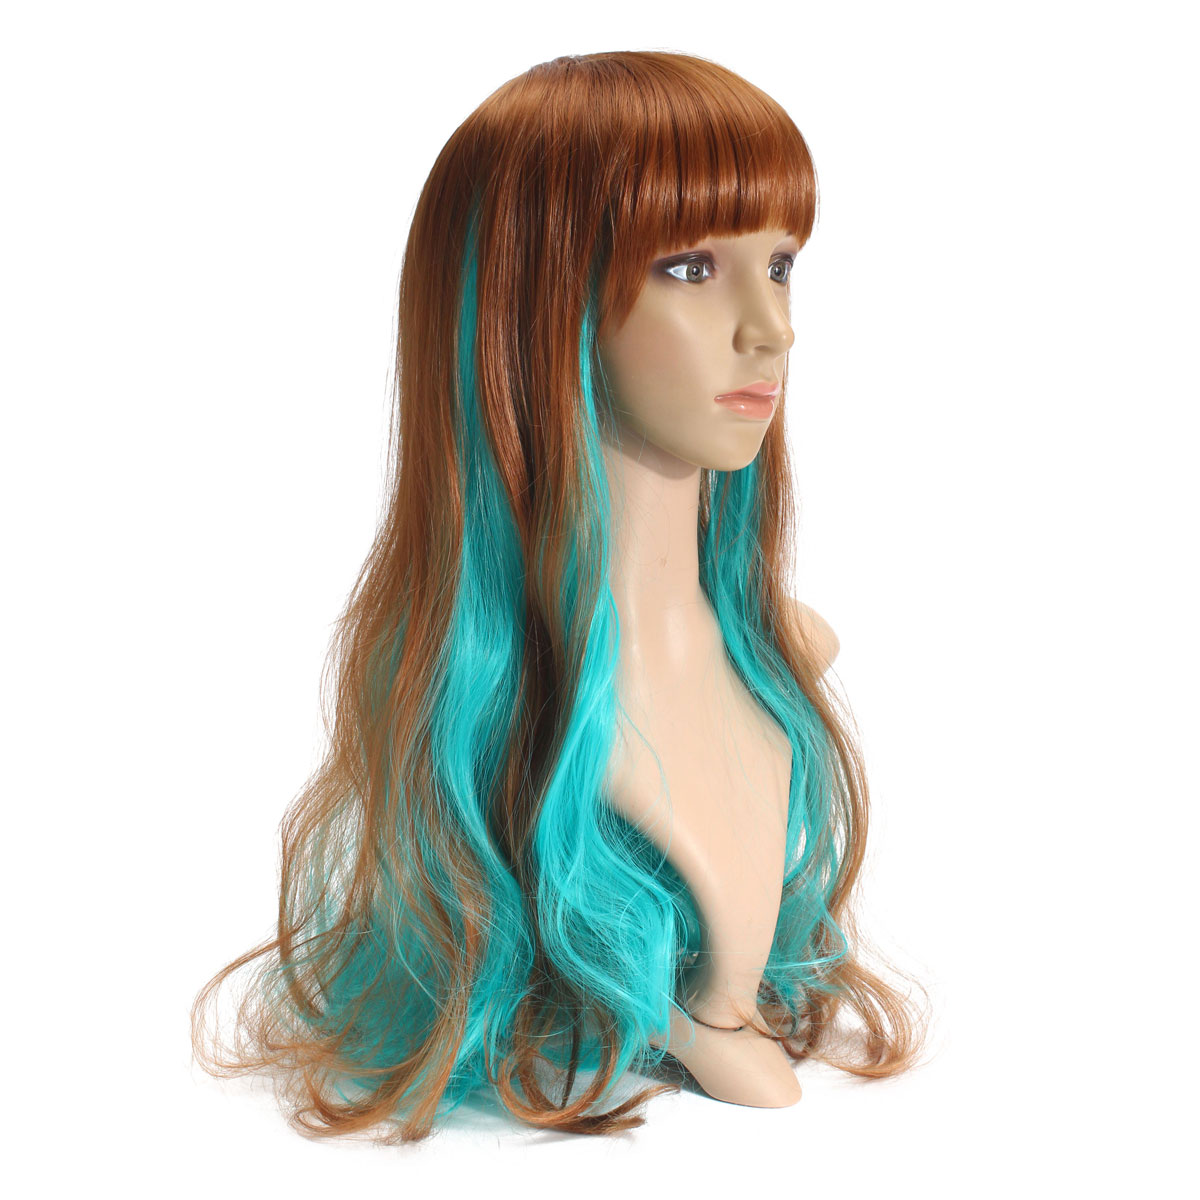 65cm-Blue-Brown-Mixed-Color-Women-Long-Curly-Wavy-Wigs-Cosplay-Party-Full-Bang-1062097